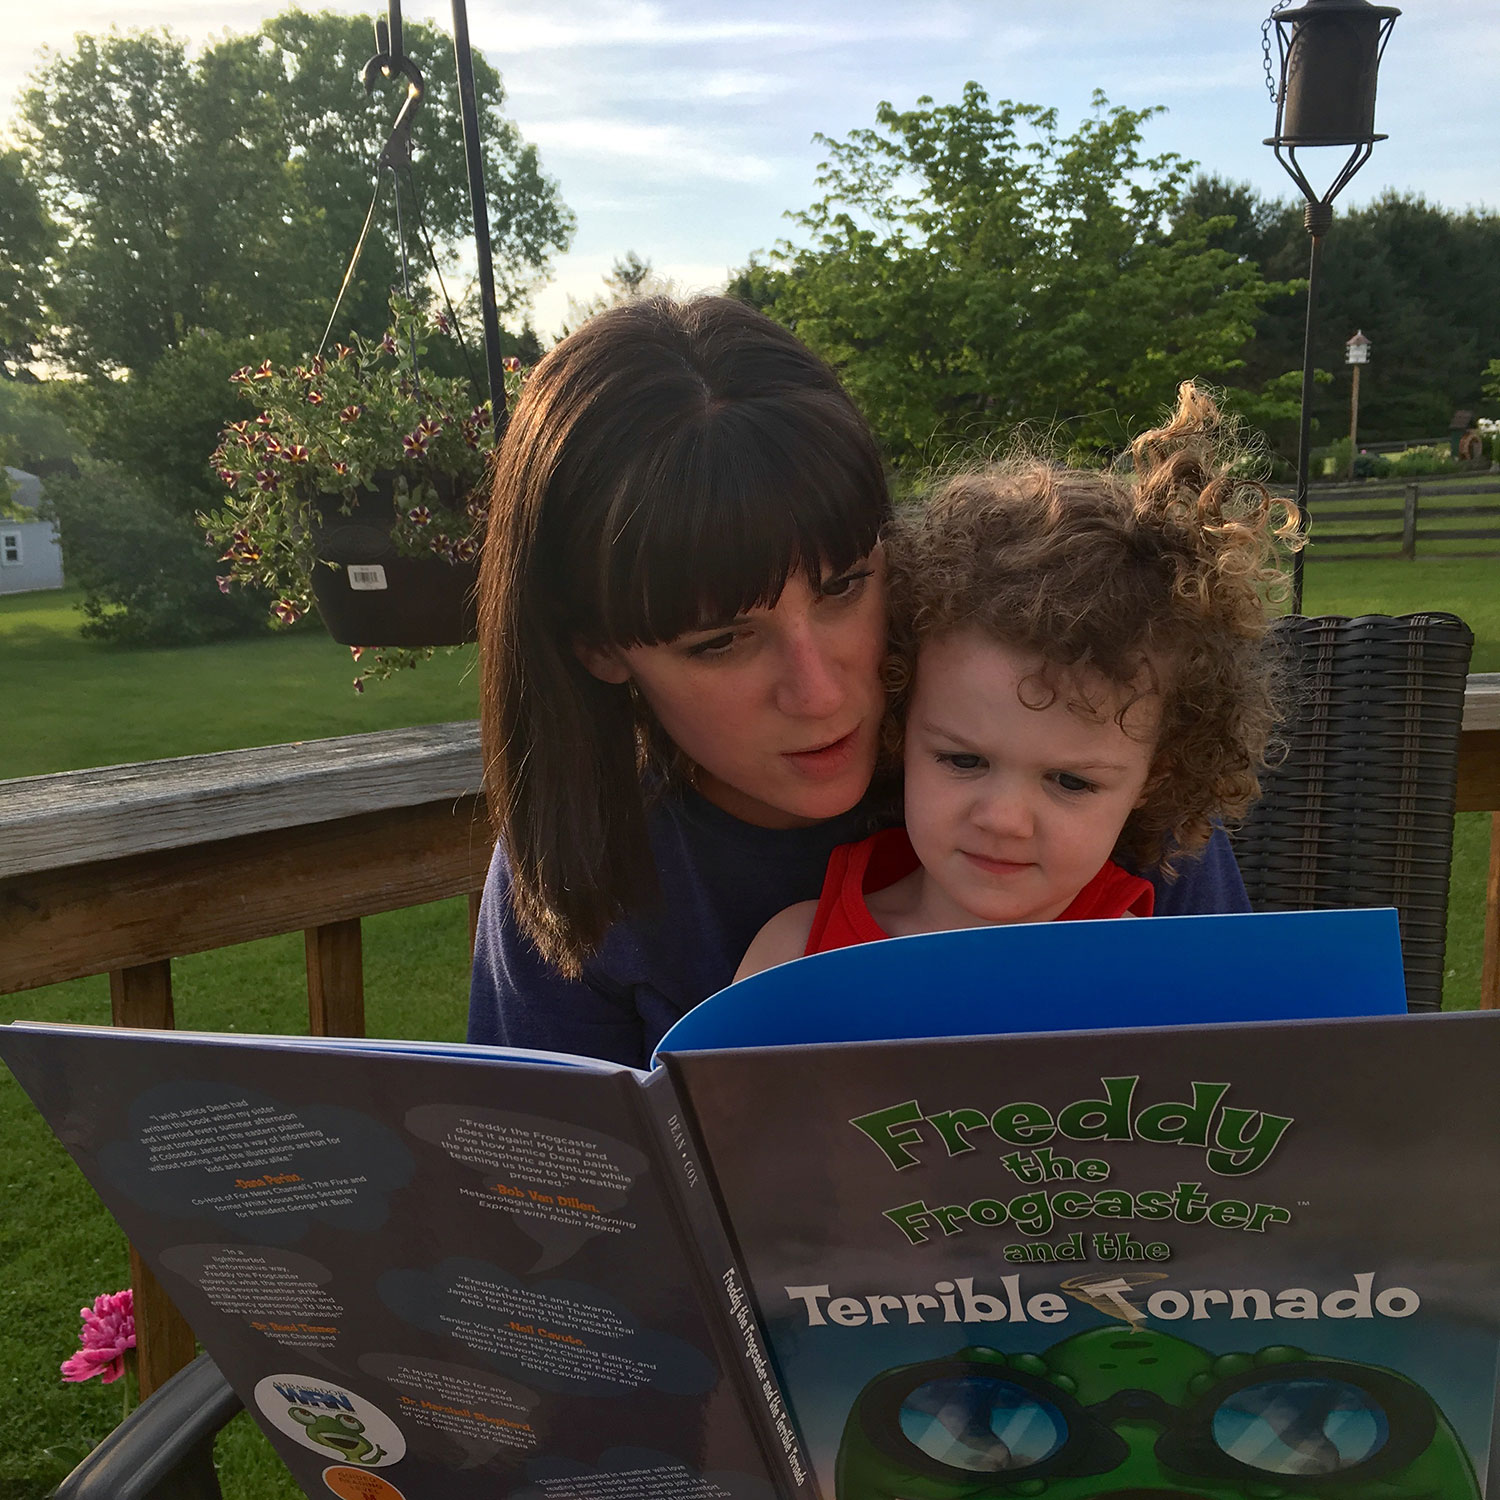 Katie Wheatley of ustornadoes.com reading to her daughter.